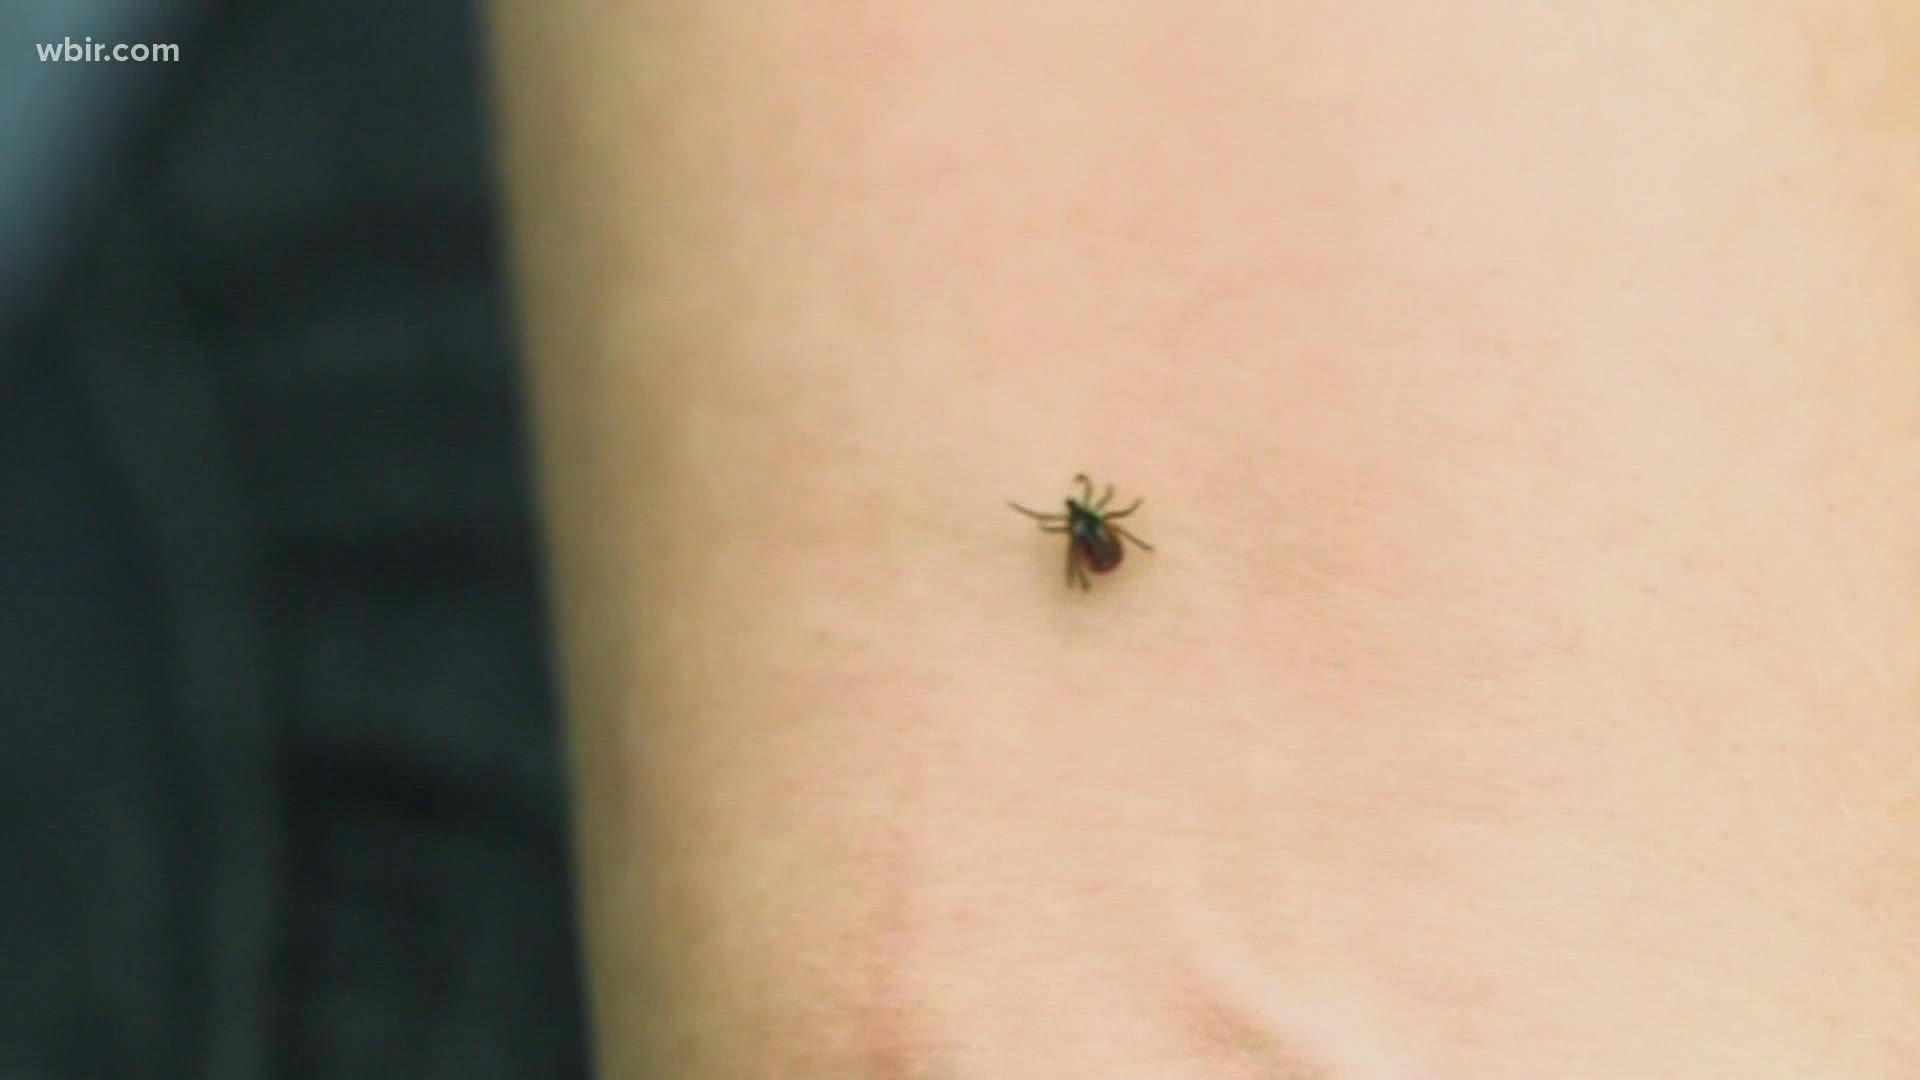 The CDC says ticks are spreading more than ever.